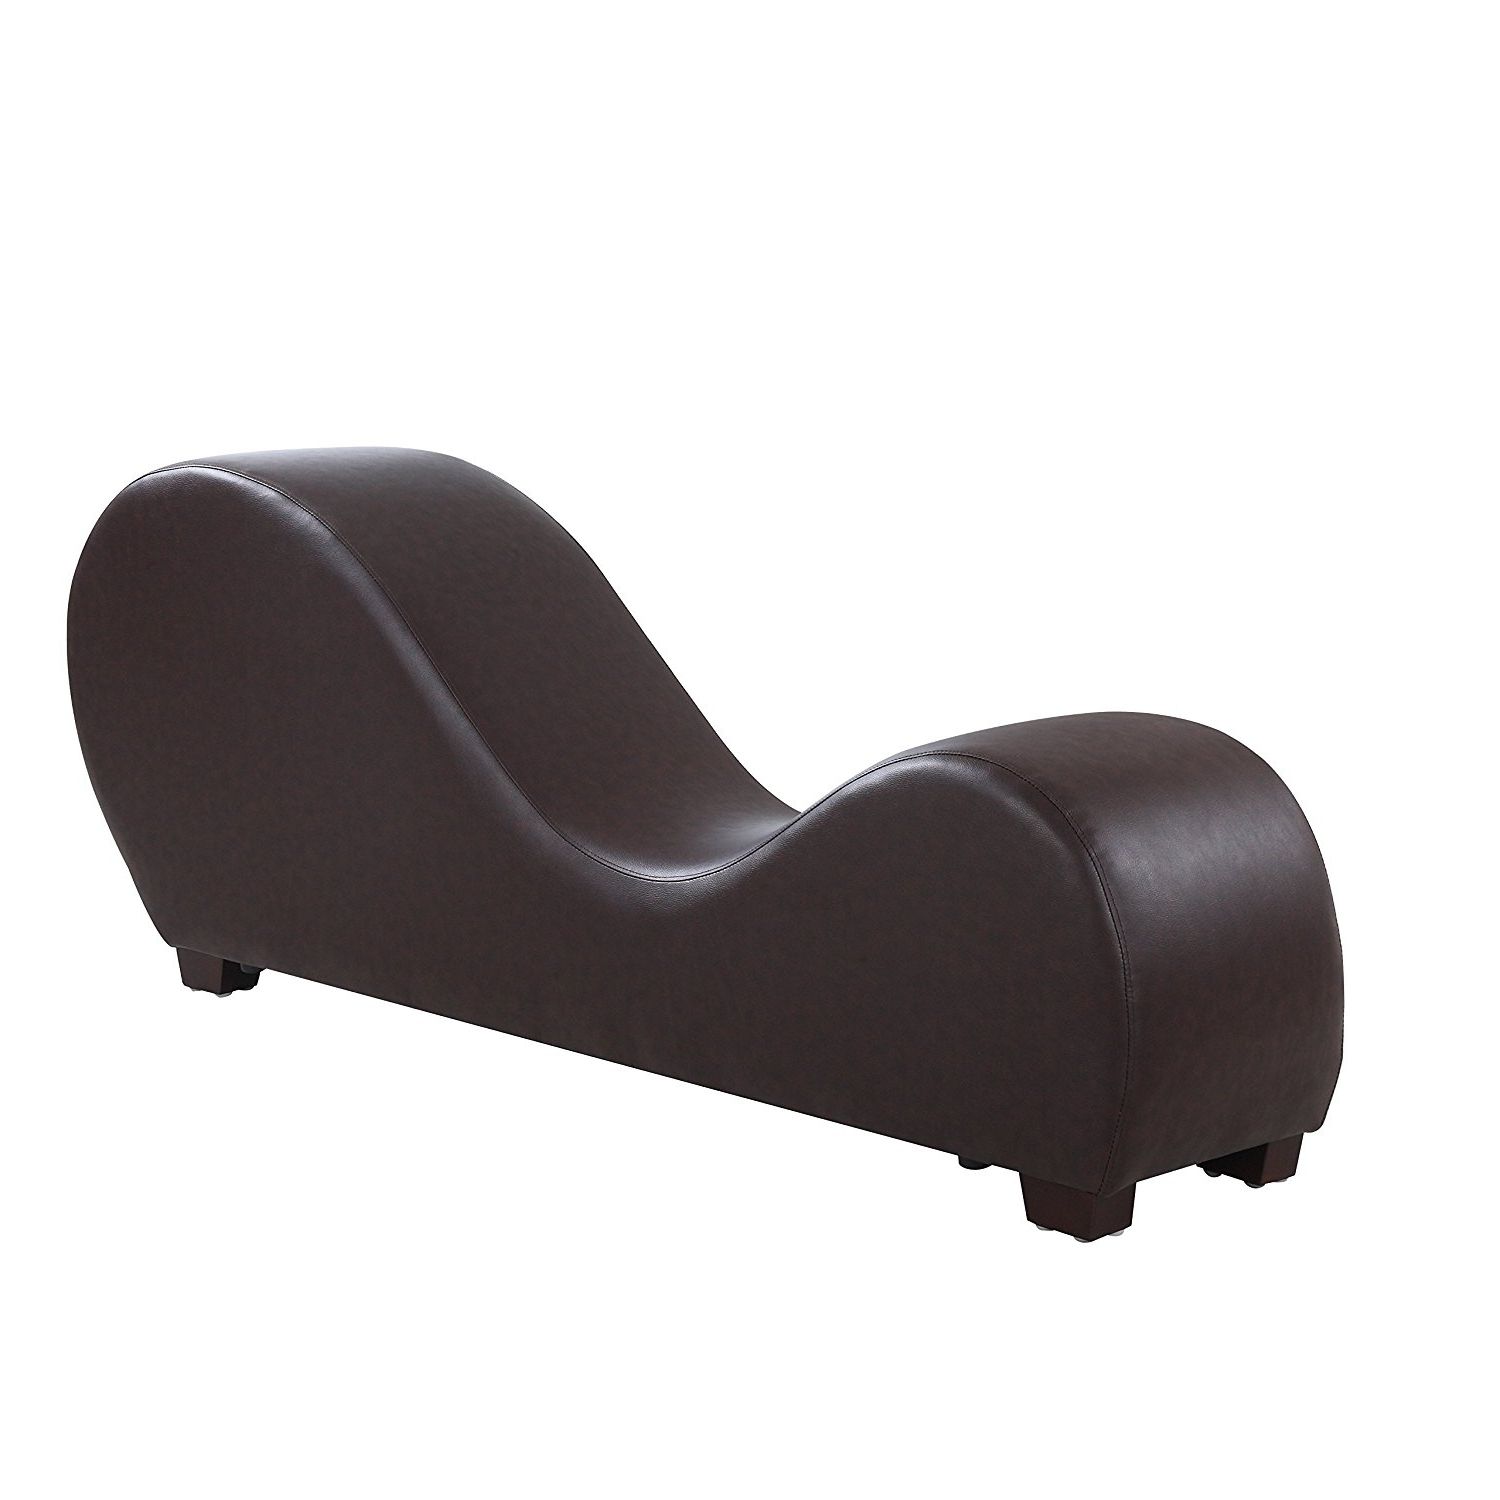 Leather Chaise Lounge Chairs Regarding Trendy Amazon: Modern Bonded Leather Chaise Lounge Yoga Chair (View 11 of 15)